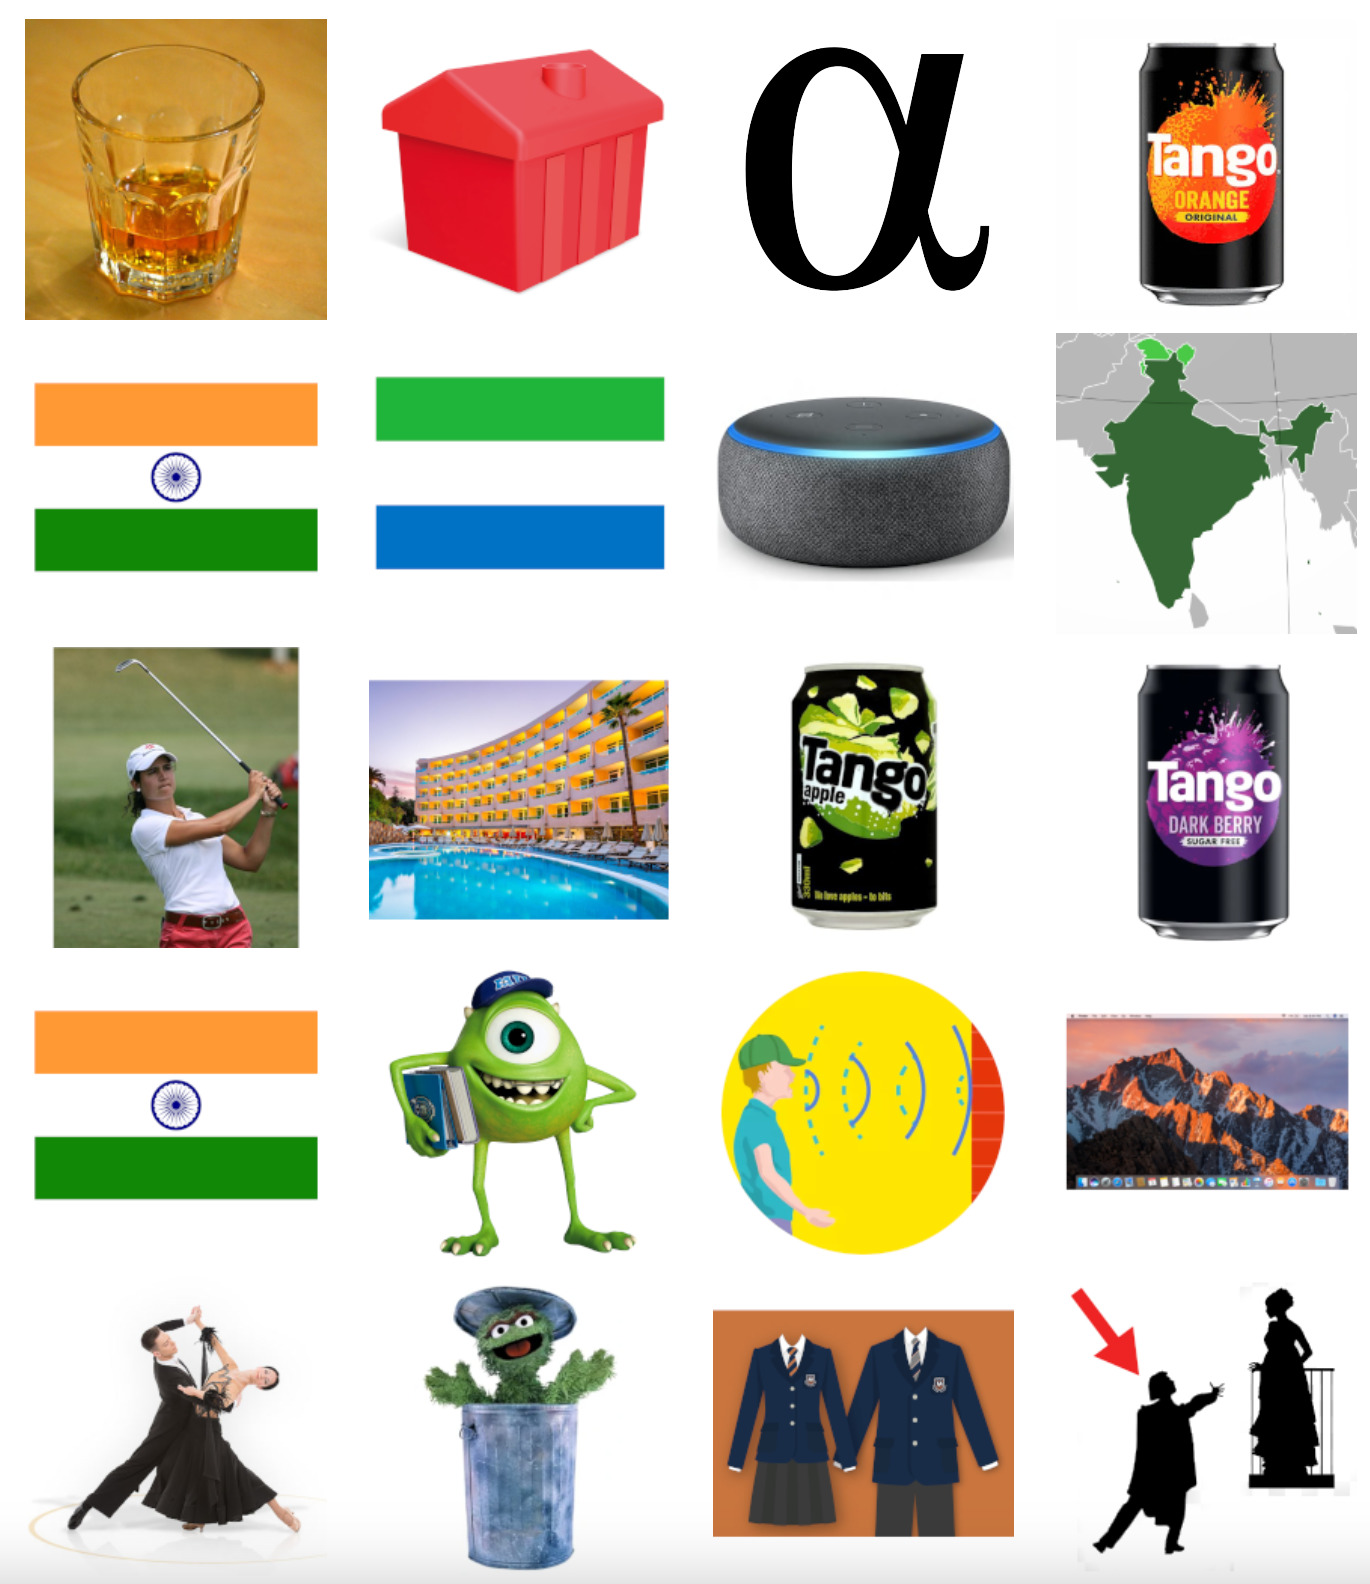 20 pictures, arranged in a grid with 4 rows and 5 columns. The pictures are: A tumbler containing a small measure of an alcoholic beverage; A piece of red plastic from a board game, shaped like a large building; The greek letter alpha; A can of orange Tango; The Indian flag; The flag of Sierra Leone; An Amazon Echo Dot; A map of the India; A woman playing golf; A large building next to a swimming pool and a palm tree; A can of apple Tango; A can of dark berry Tango; The Indian flag; A picture of Mike Wazowski from Monsters Inc wearing a baseball cap and holding a book; A diagram of a boy shouting at a wall and the sound waves being reflected; The desktop of macOS Sierra; Two people ballroom dancing; Oscar the Grouch from Sesame Street in a garbage can; Two school uniforms on an orange background; A silhouette of two figures: a woman is standing on a balcony with a man standing beneath; an arrow is pointing at the man.